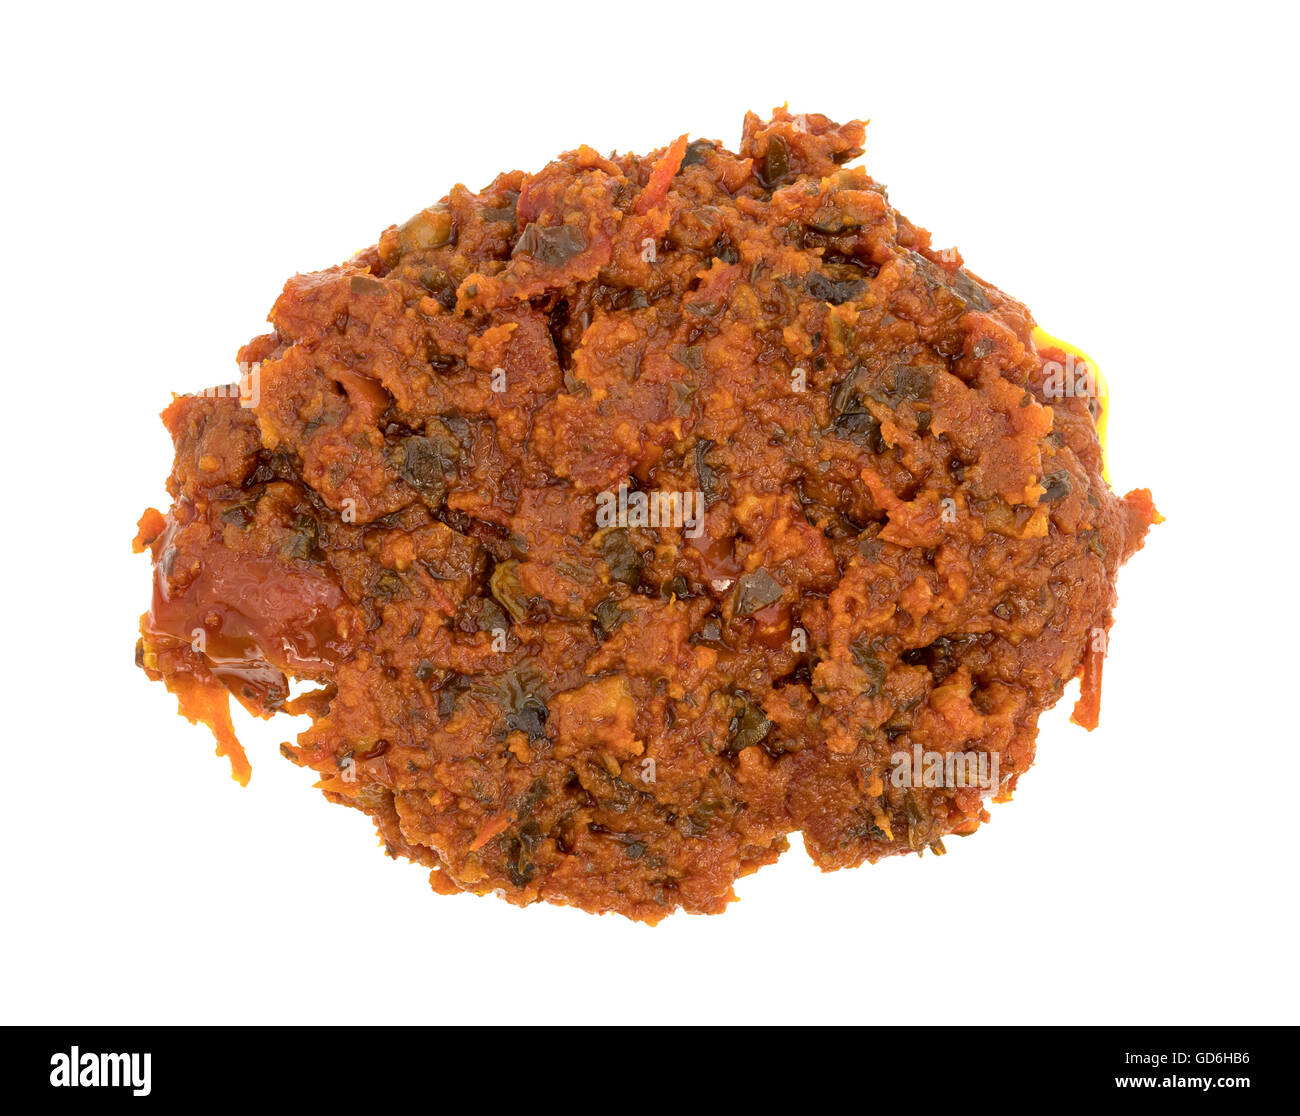 Top view of a small portion of tomato pesto sauce with sun dried tomatoes and pine nuts isolated on a white background. Stock Photo